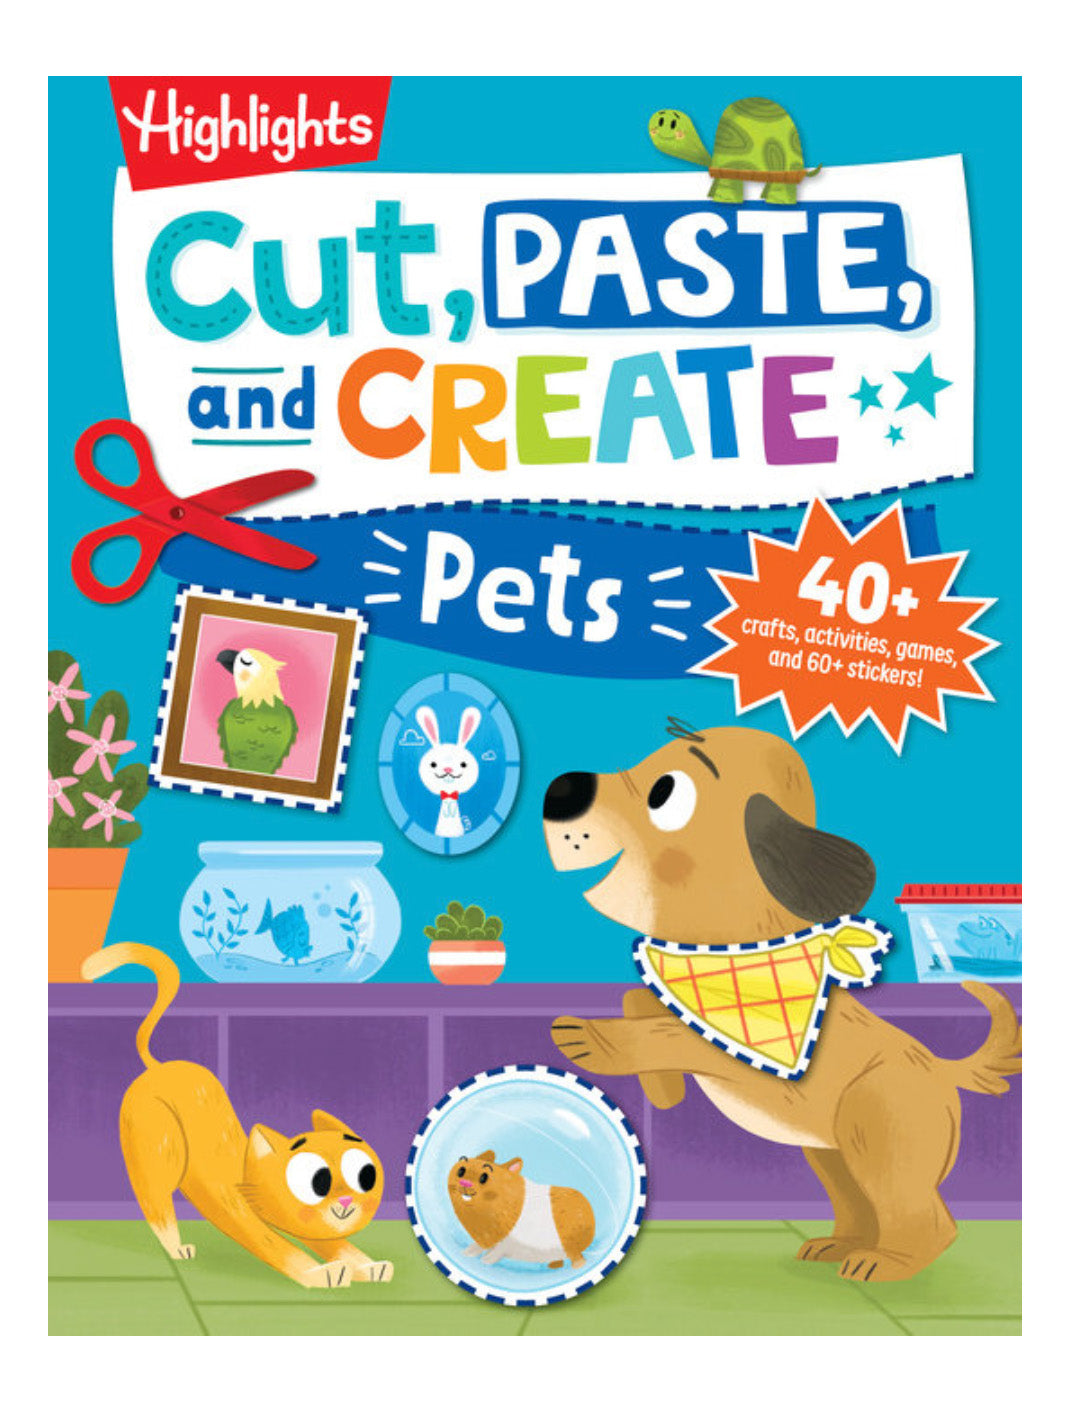 cut, paste, and create pets